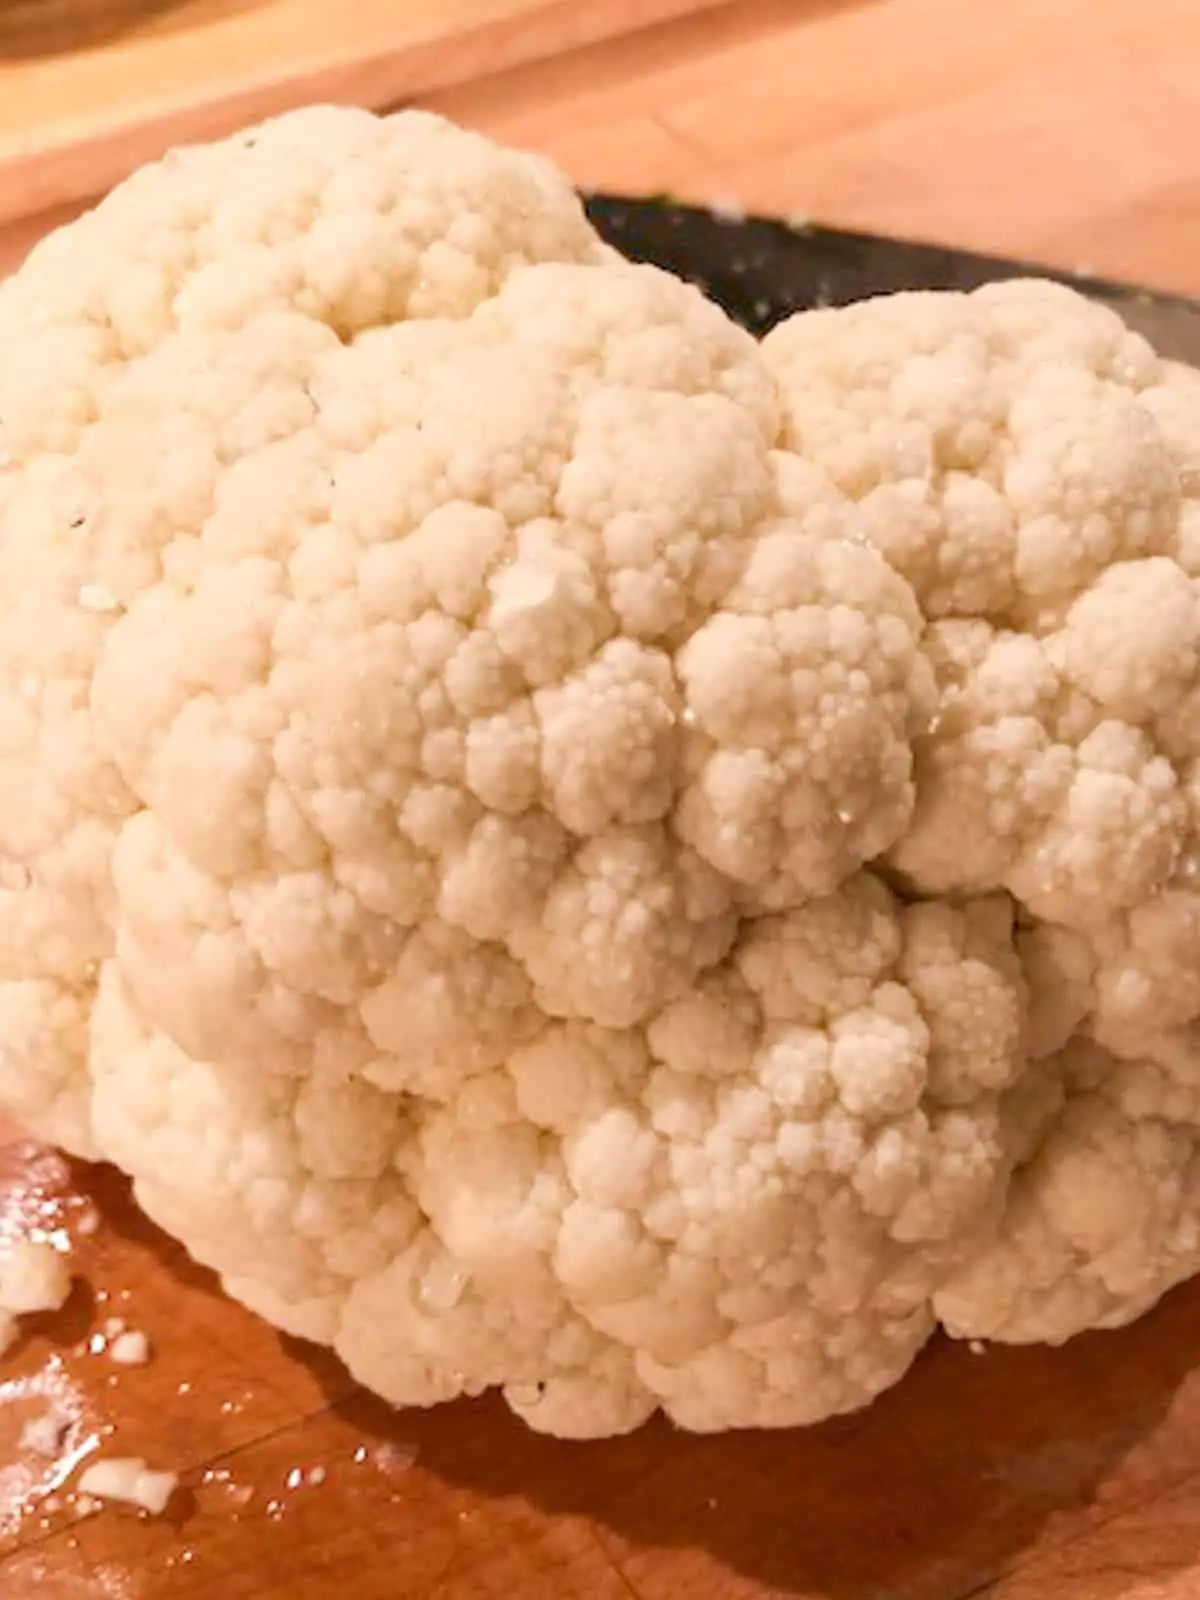 A close up of a head of cauliflower with a glimpse of a knife in the background.